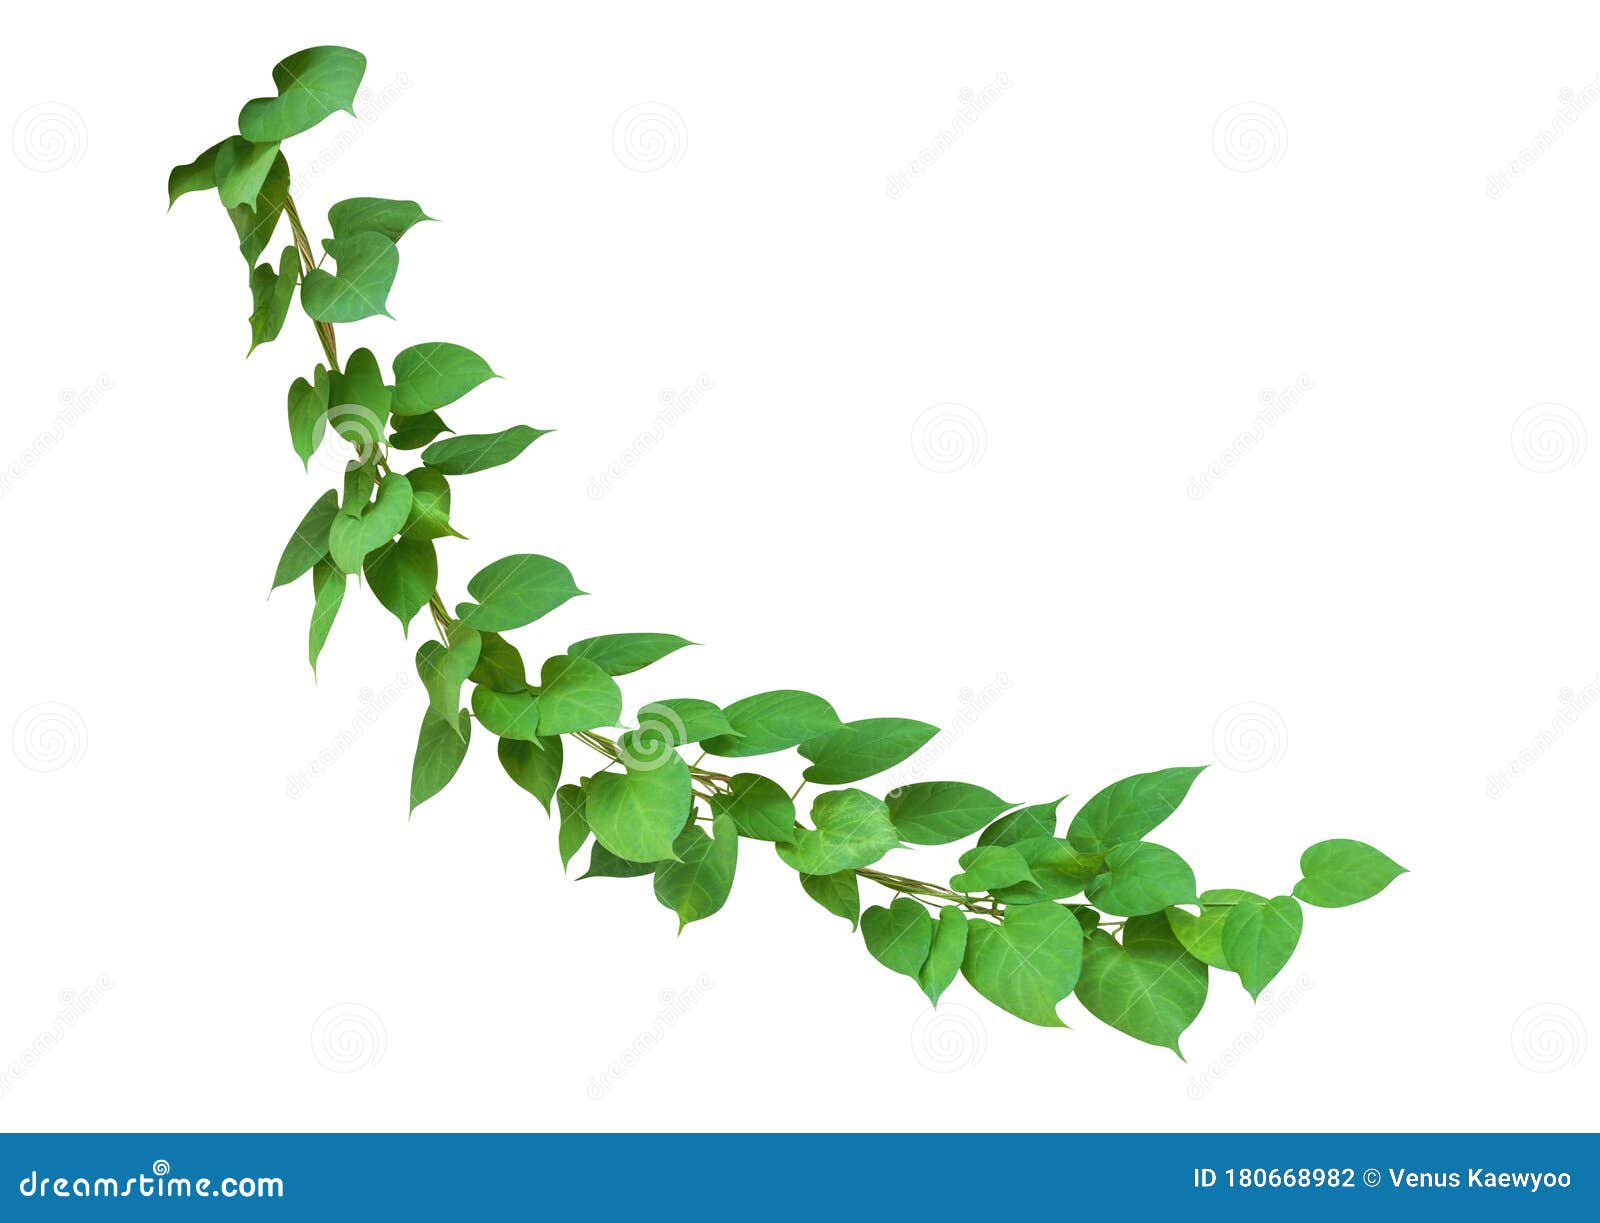 Heart Shaped Green Leaves Wild Climbing Vine, Isolated on White ...